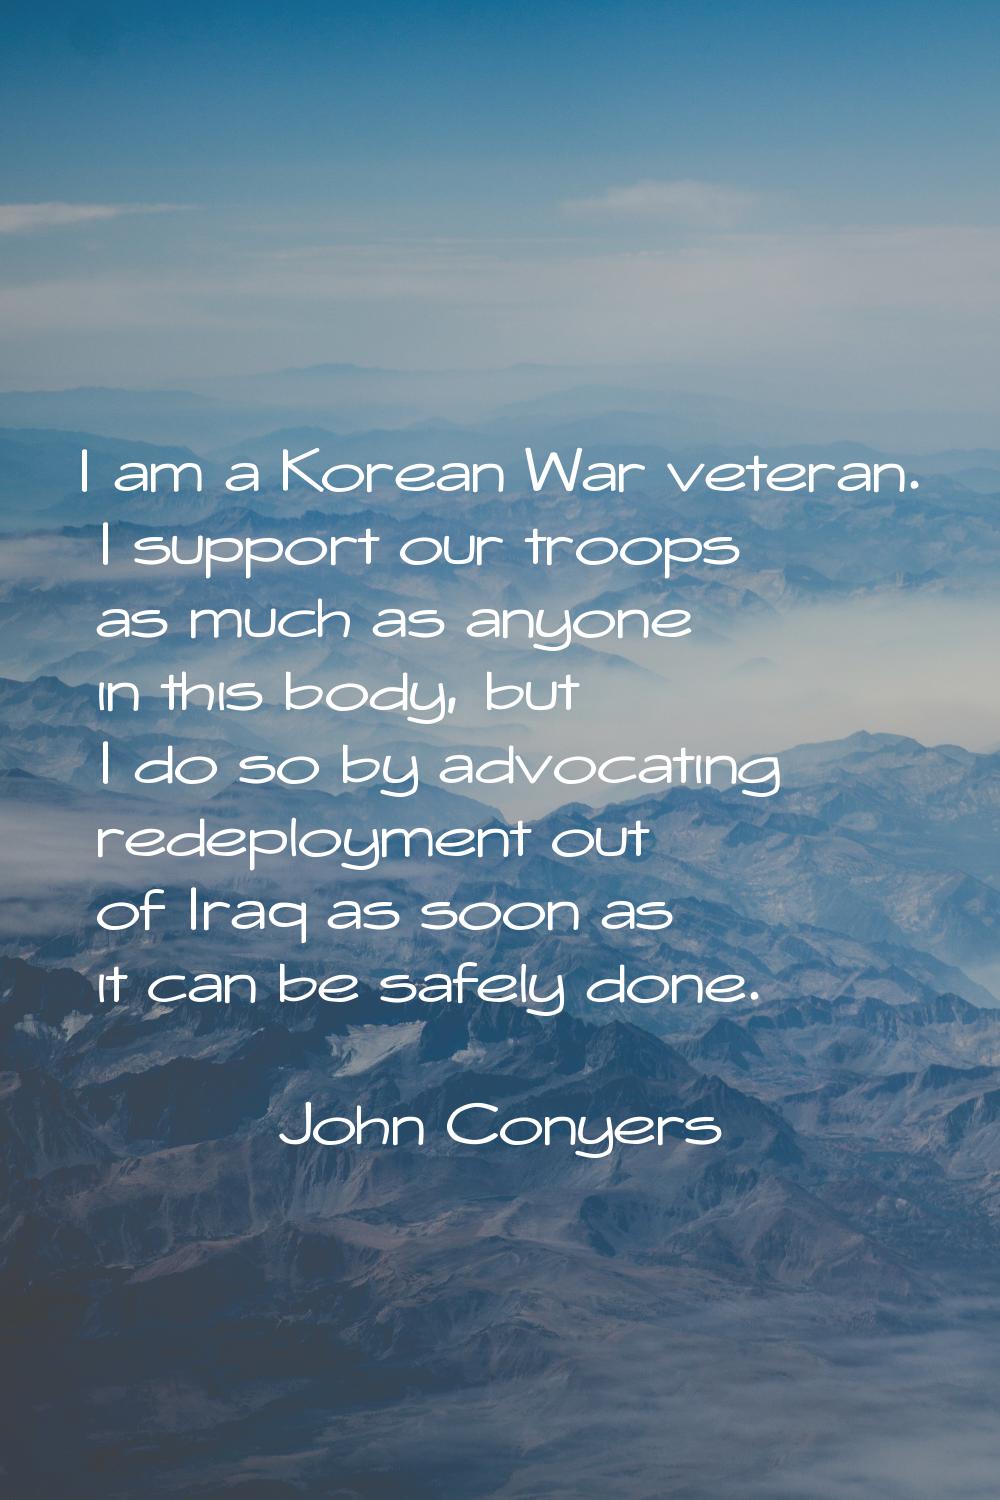 I am a Korean War veteran. I support our troops as much as anyone in this body, but I do so by advo